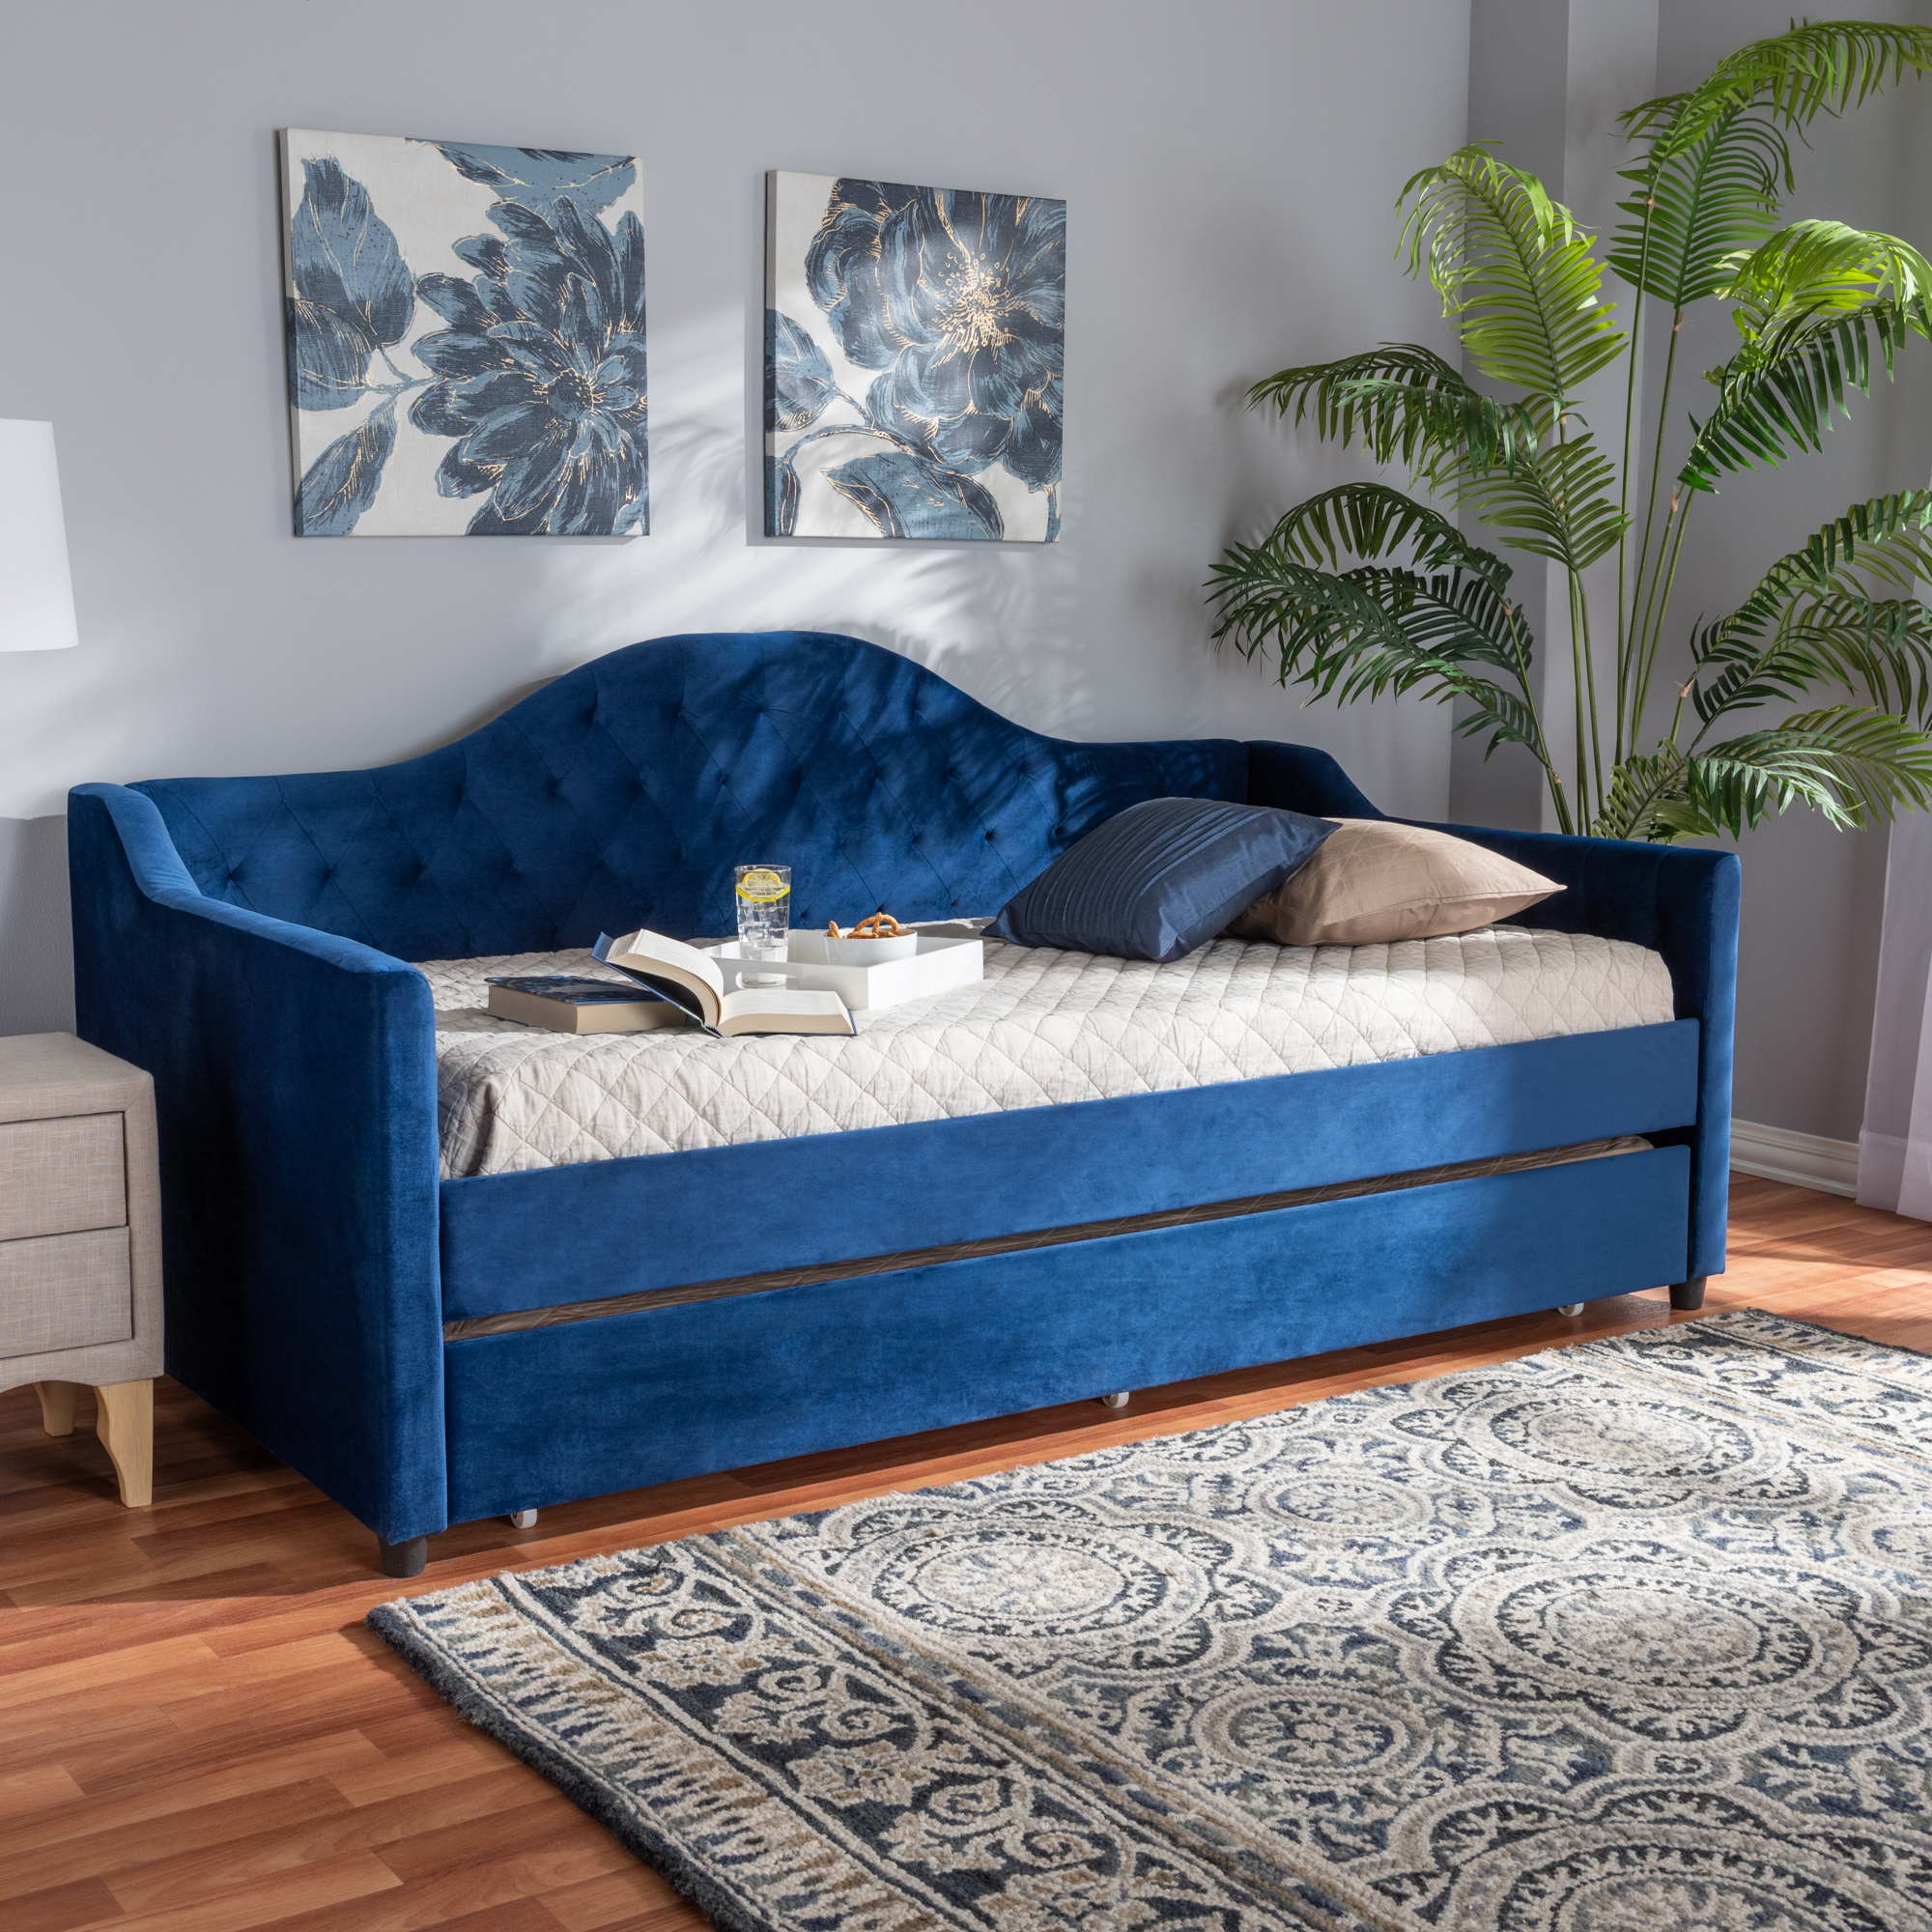 Perry Modern Blue Velvet Tufted Sofa Daybed Frame with Pull-Out Guest Trundle | eBay